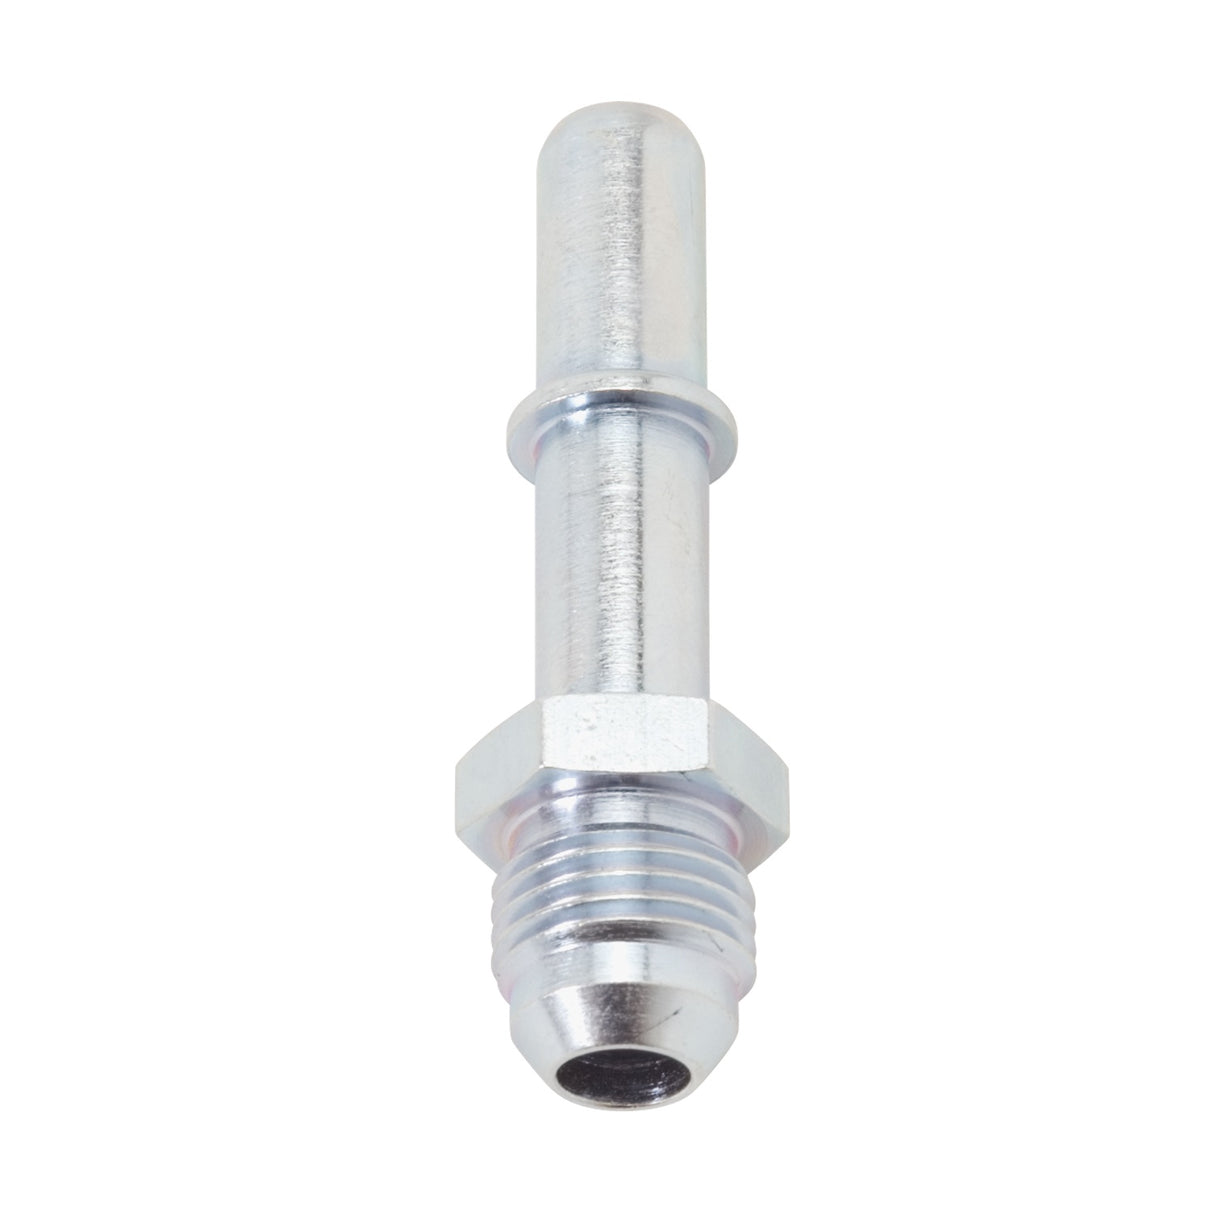 640930 | EFI ADAPTER FITTING -6 AN MALE TO 5/16" SAE QUICK DISCONNECT MALE CLEAR ZINC FINISH